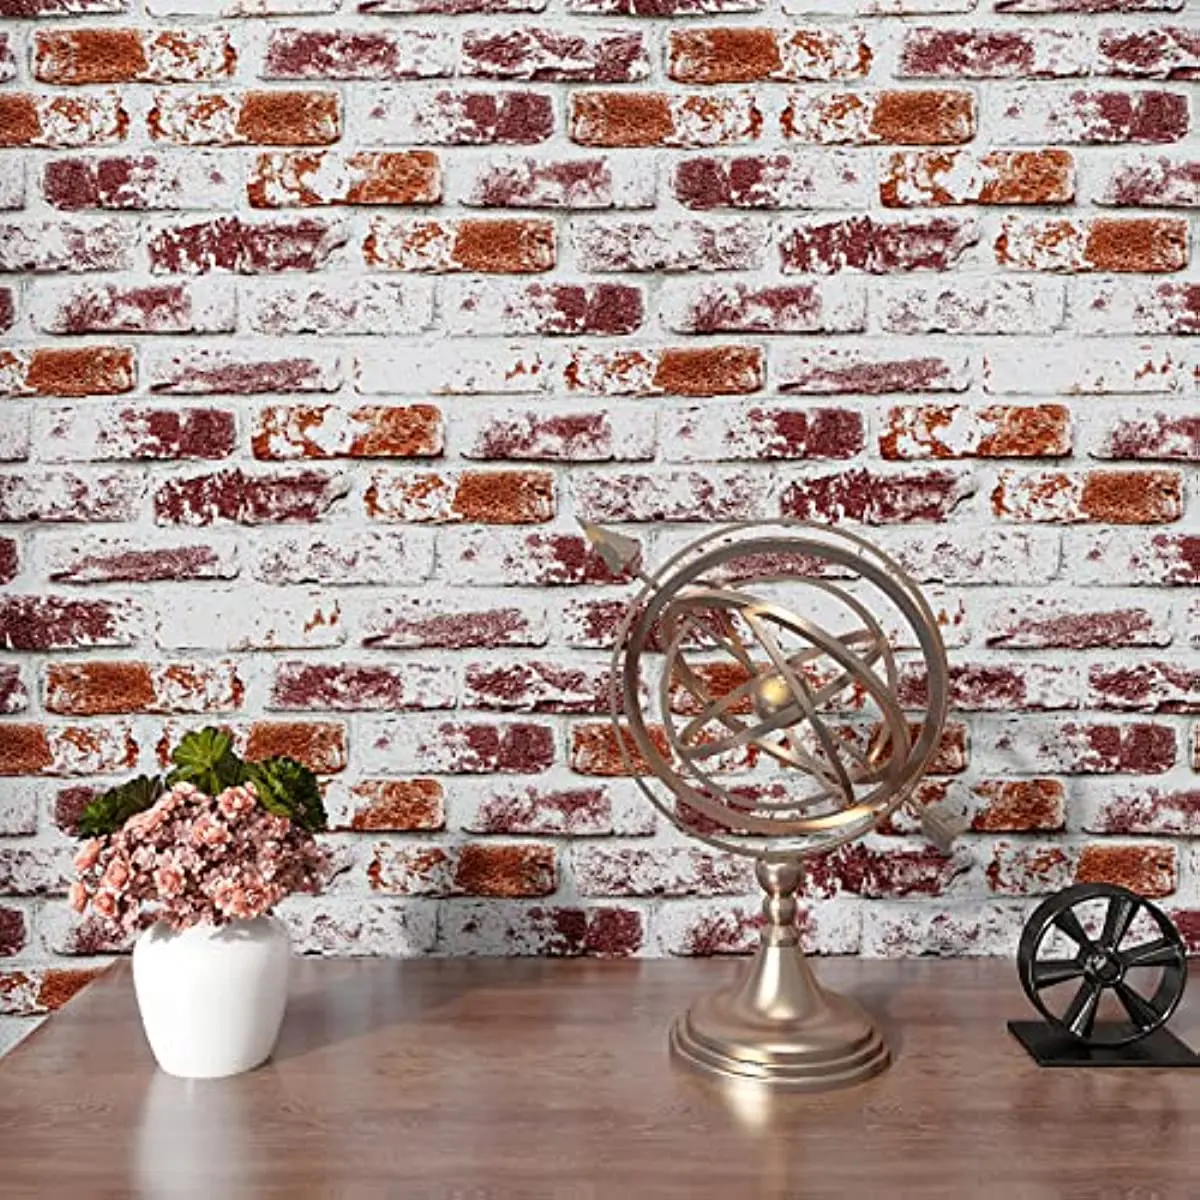 Rustic Painted Red Brick Peel and Stick Wallpaper Brick Contact Paper Faux Brick Self Adhesive Removable Wallpaper Wall Decor